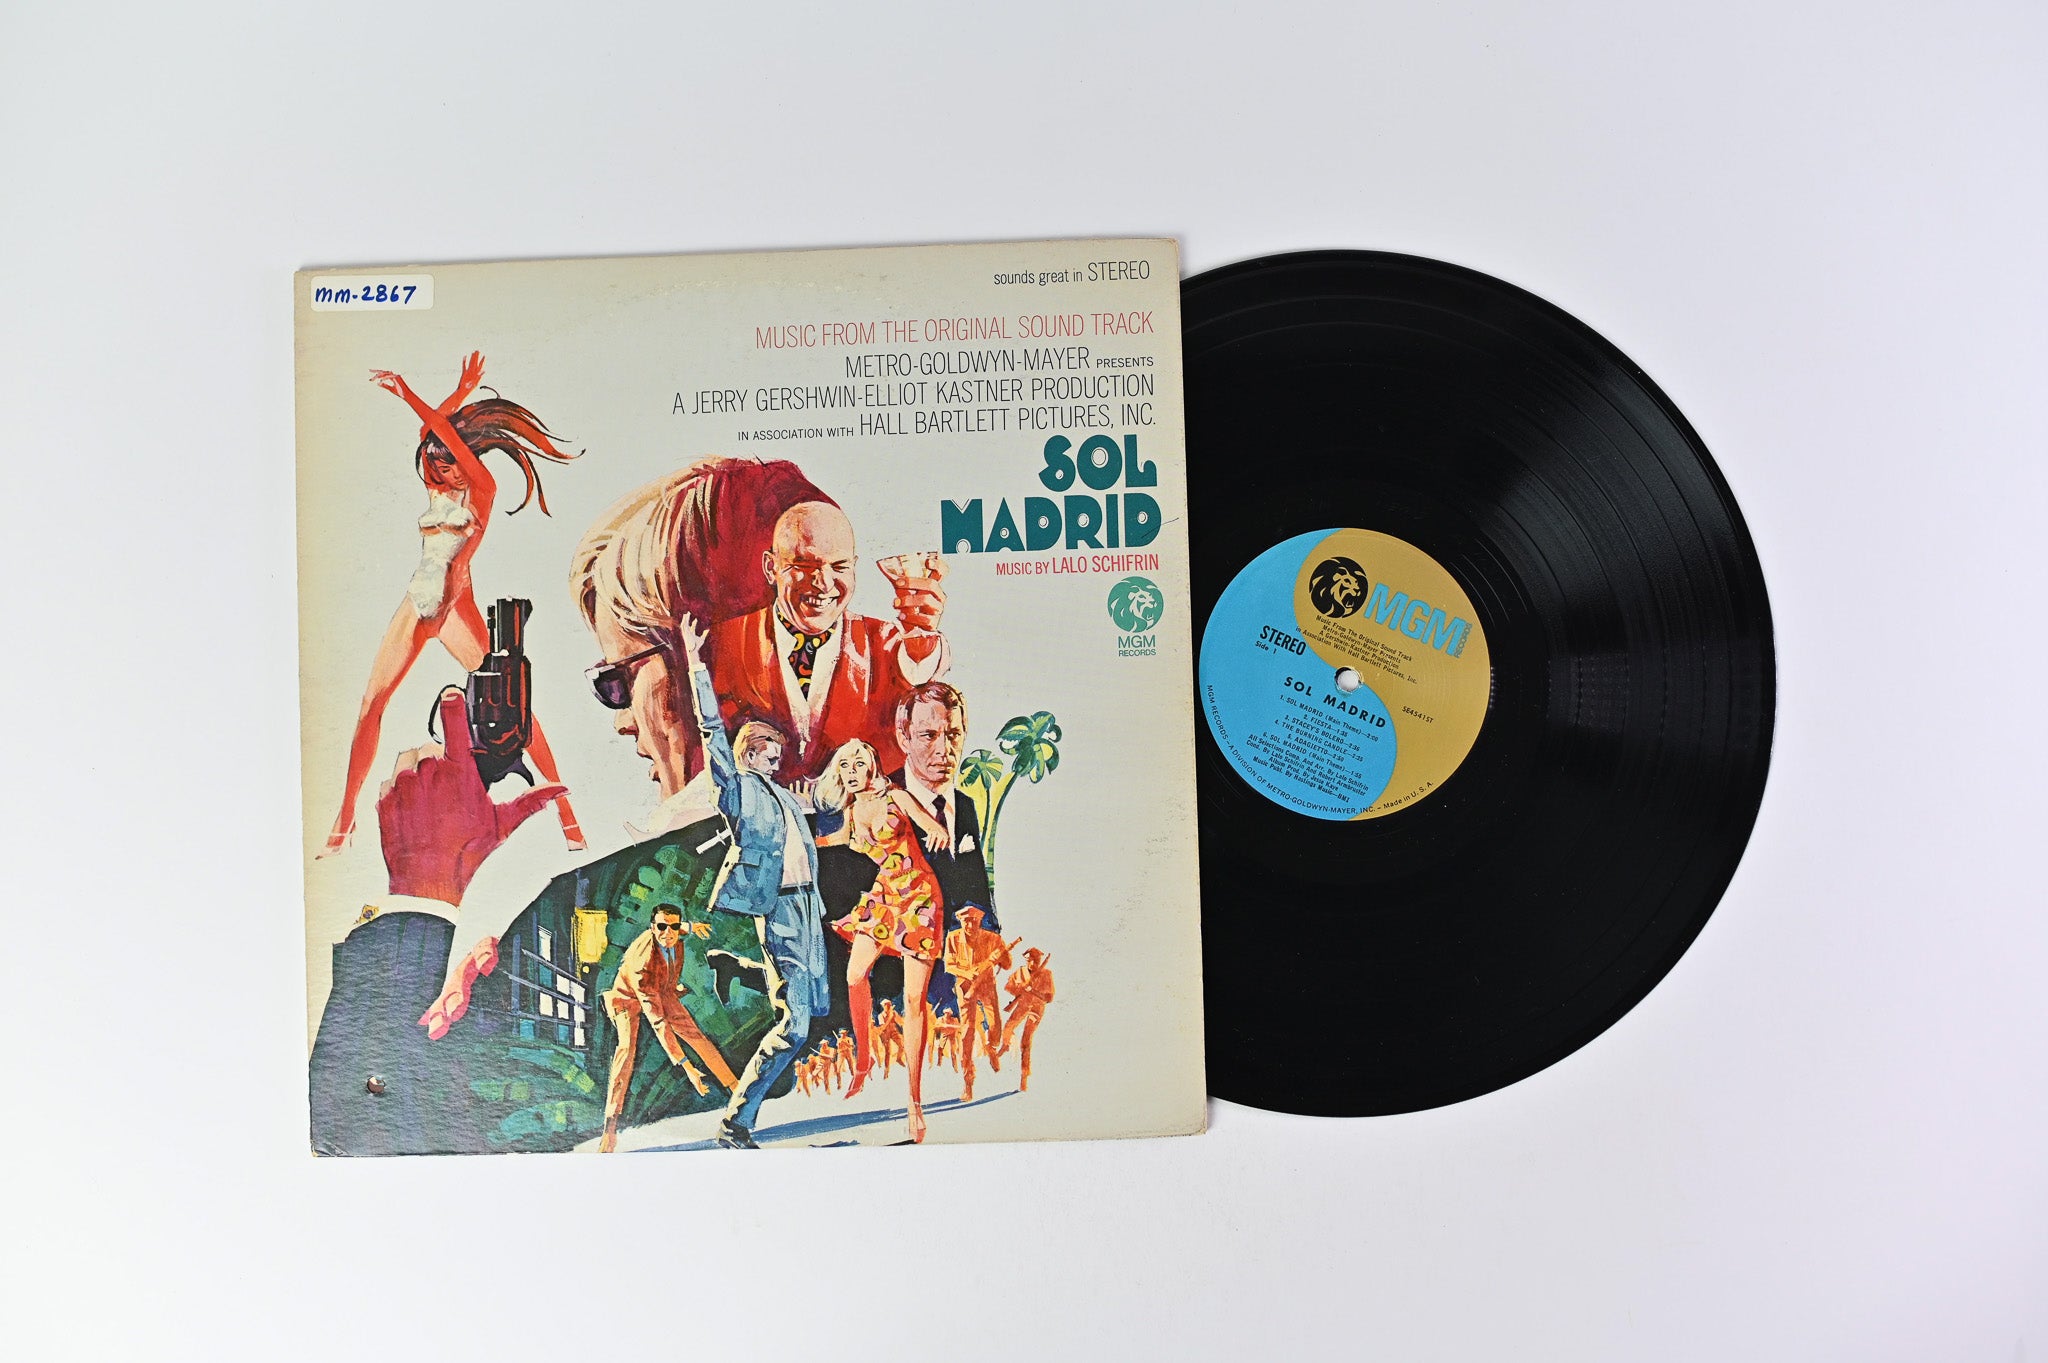 Lalo Schifrin - Sol Madrid (Music From The Original Sound Track) on MGM Records